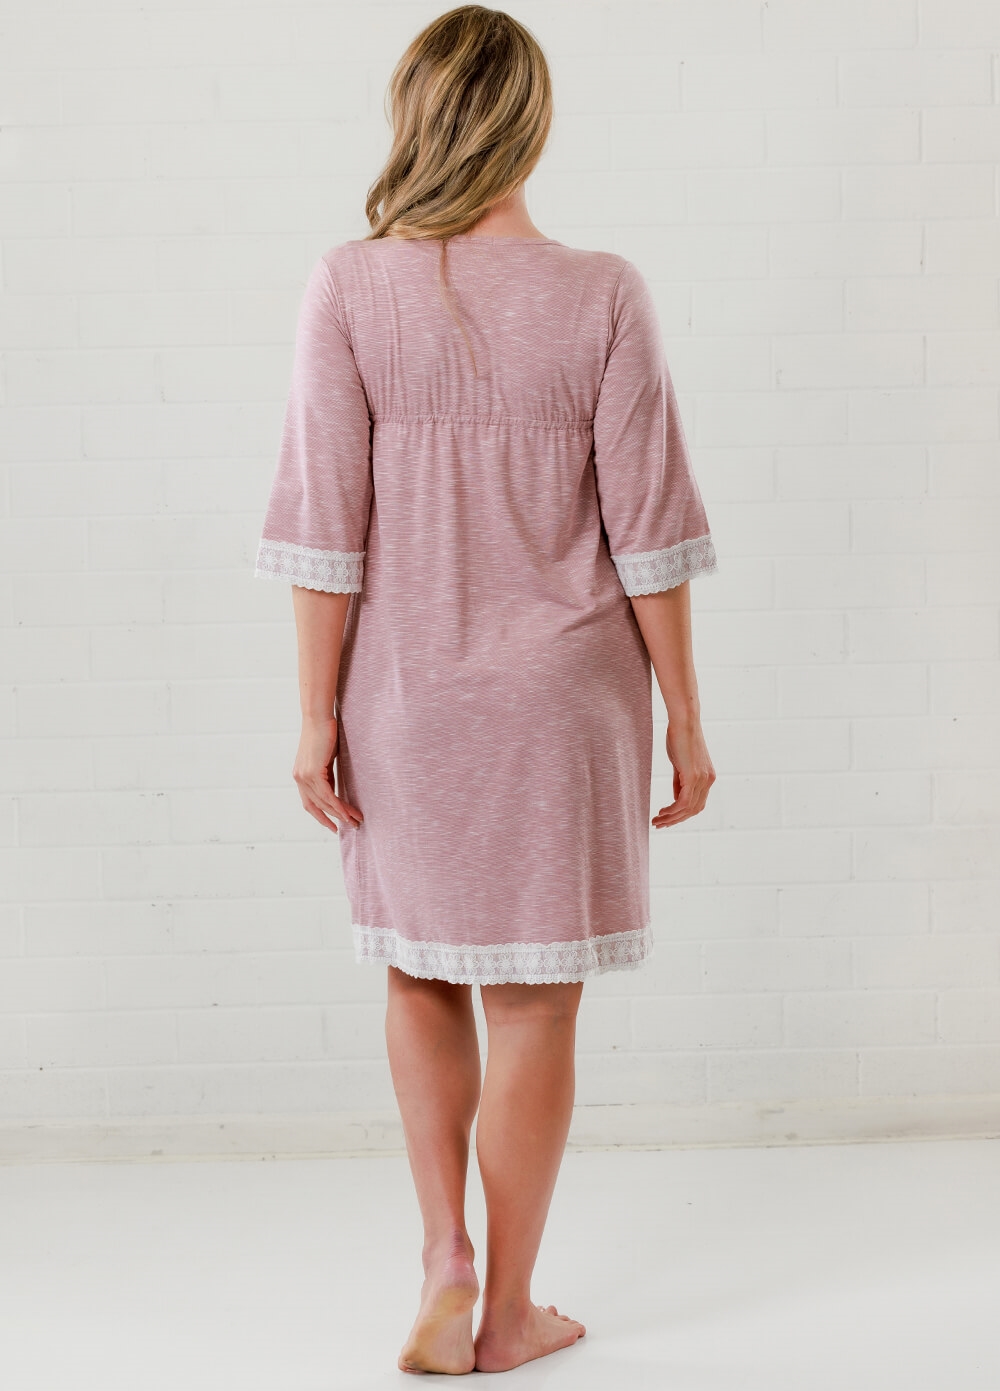 Lait & Co - Moselle Maternity Robe in Pink | Queen Bee